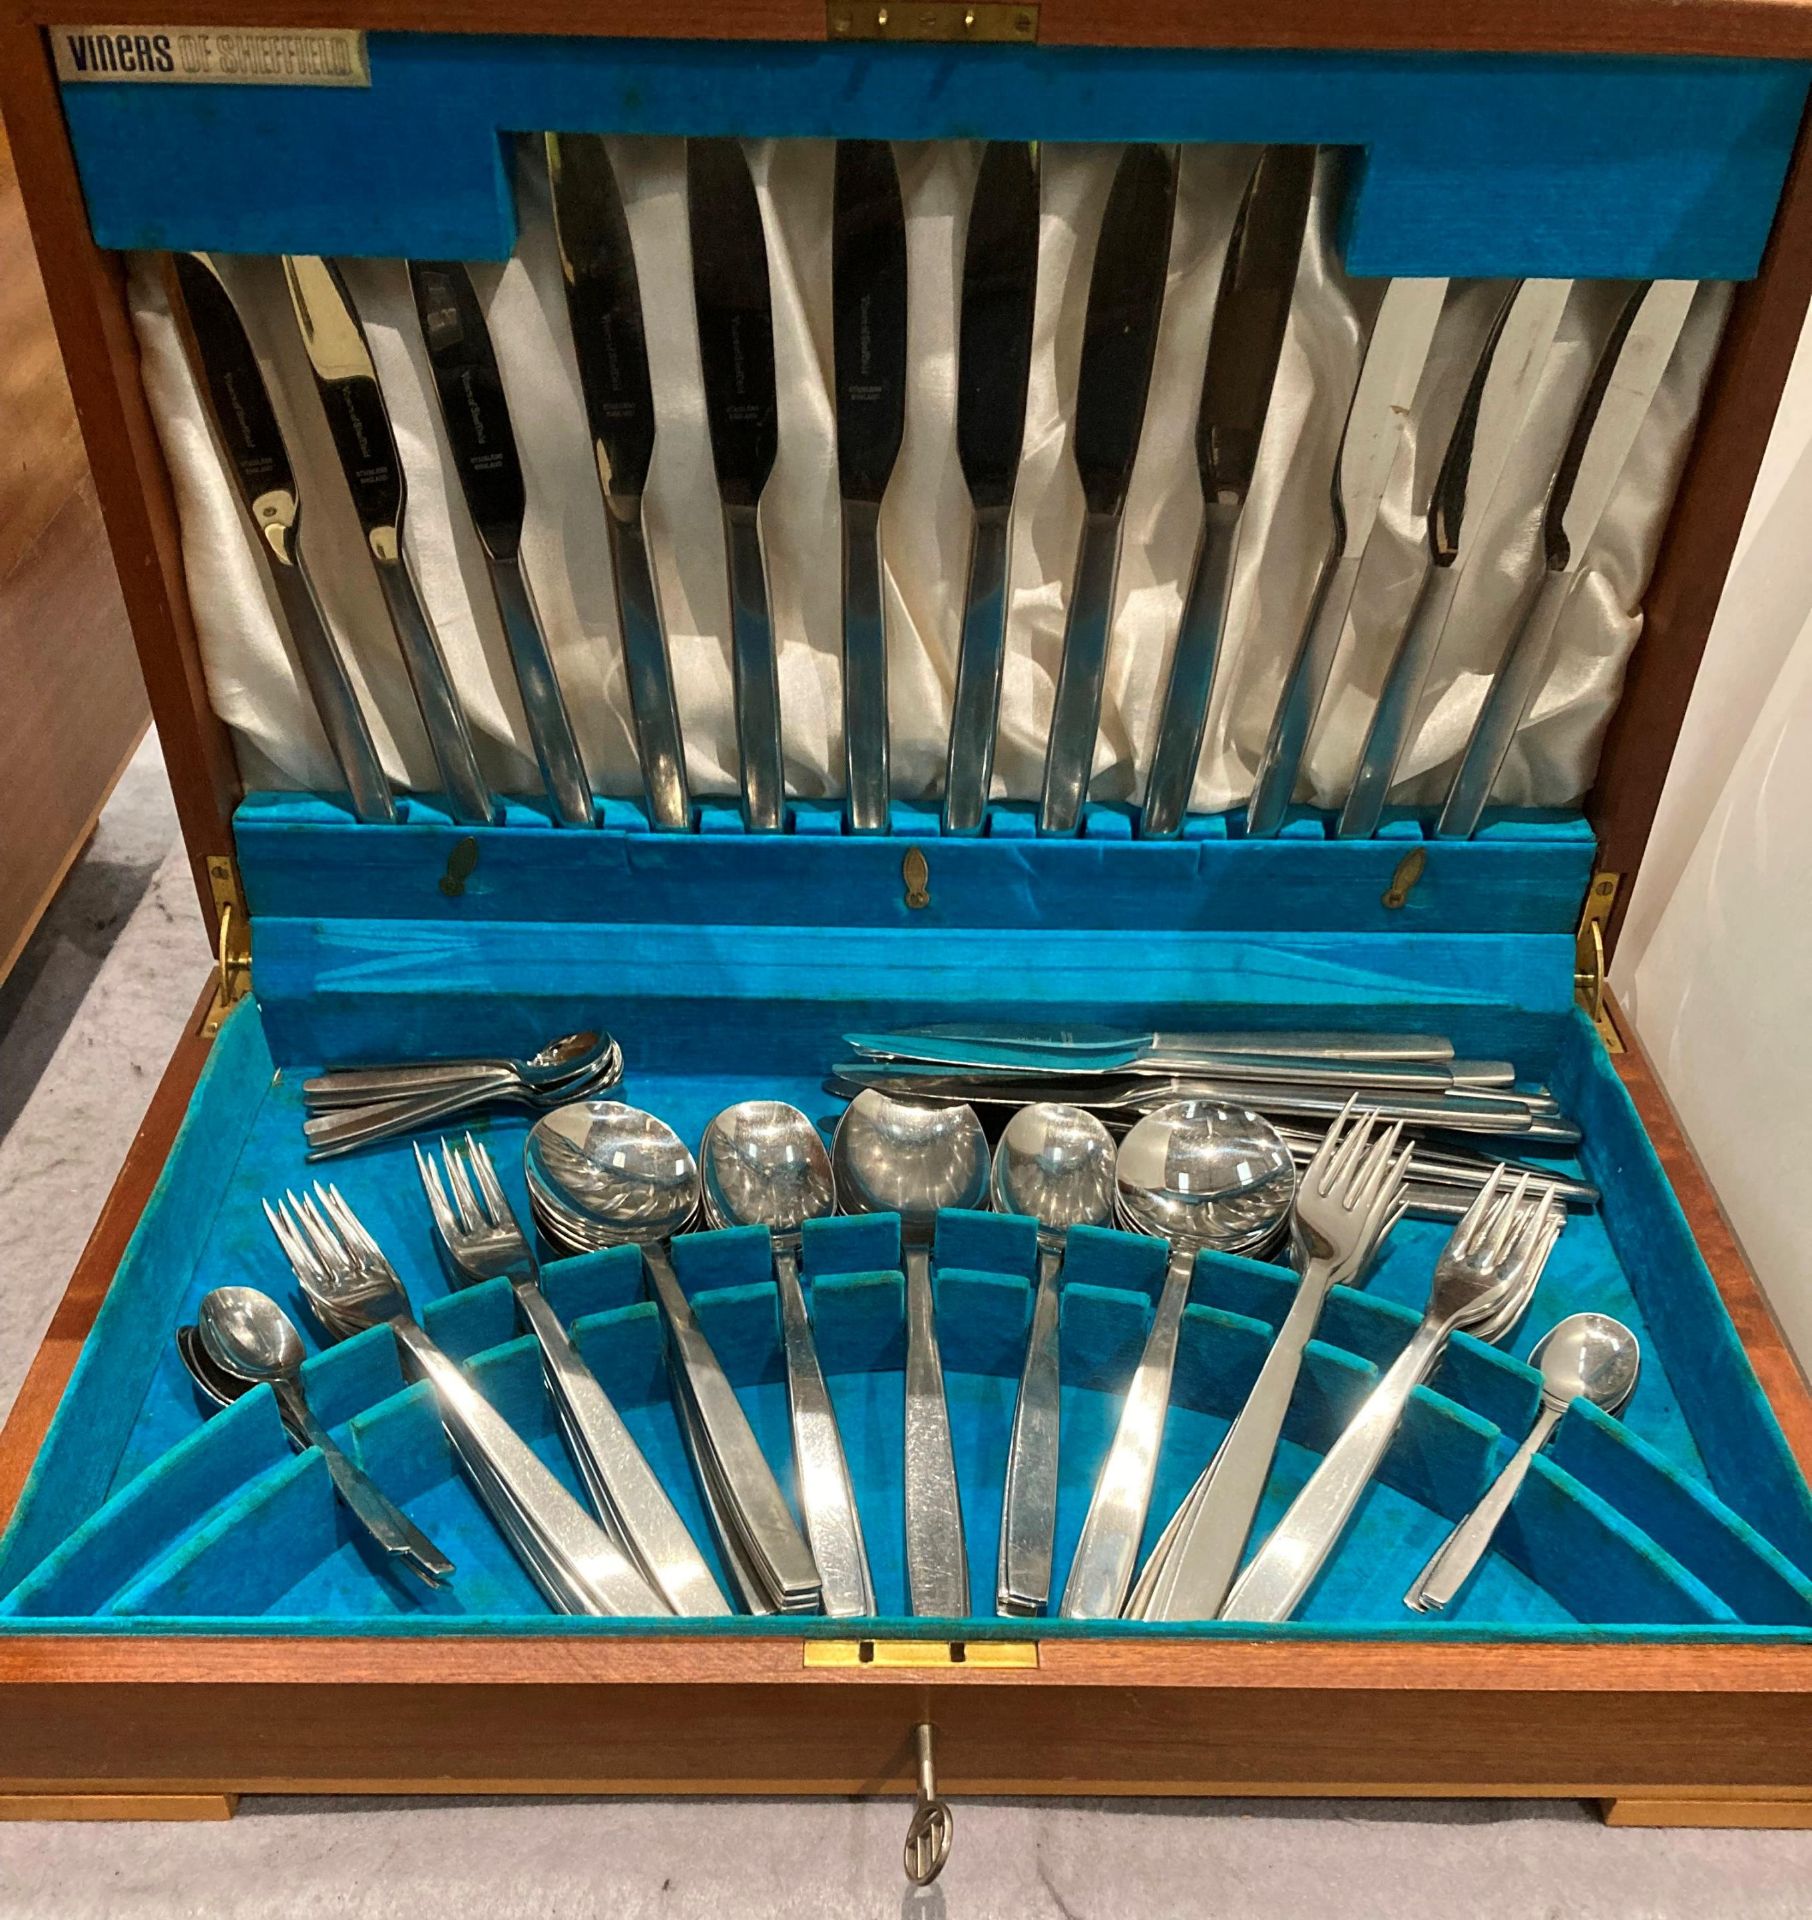 A Viners of Sheffield cutlery canteen containing eighty-five pieces of Viners stainless steel